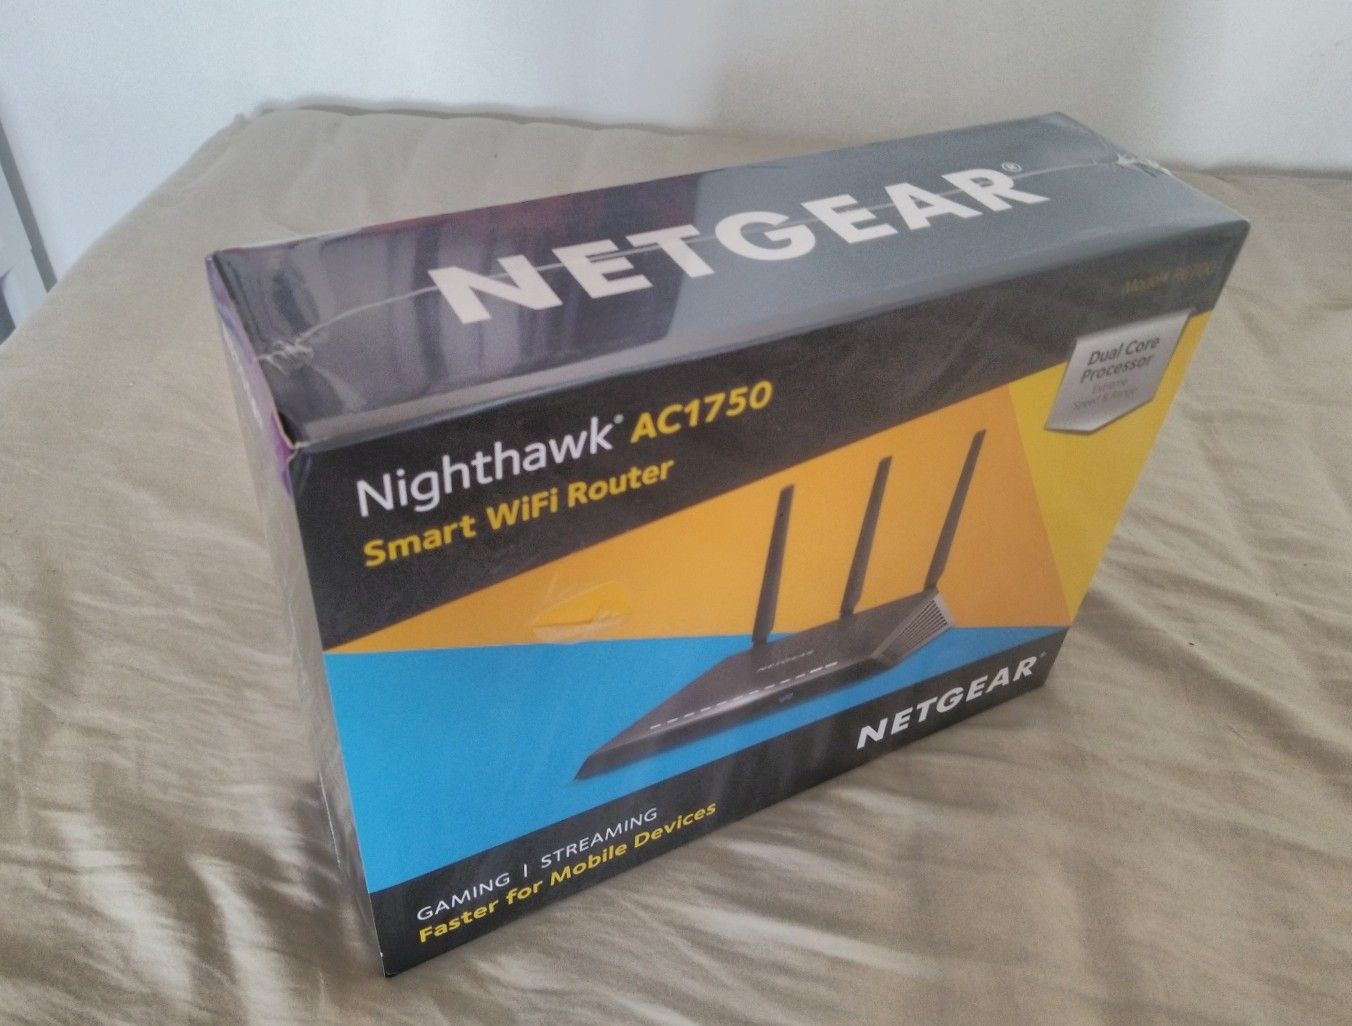 Netgear Nighthawk AC1750 Smart Wifi Router. Gaming, streaming, faster for mobile devices. Brand new